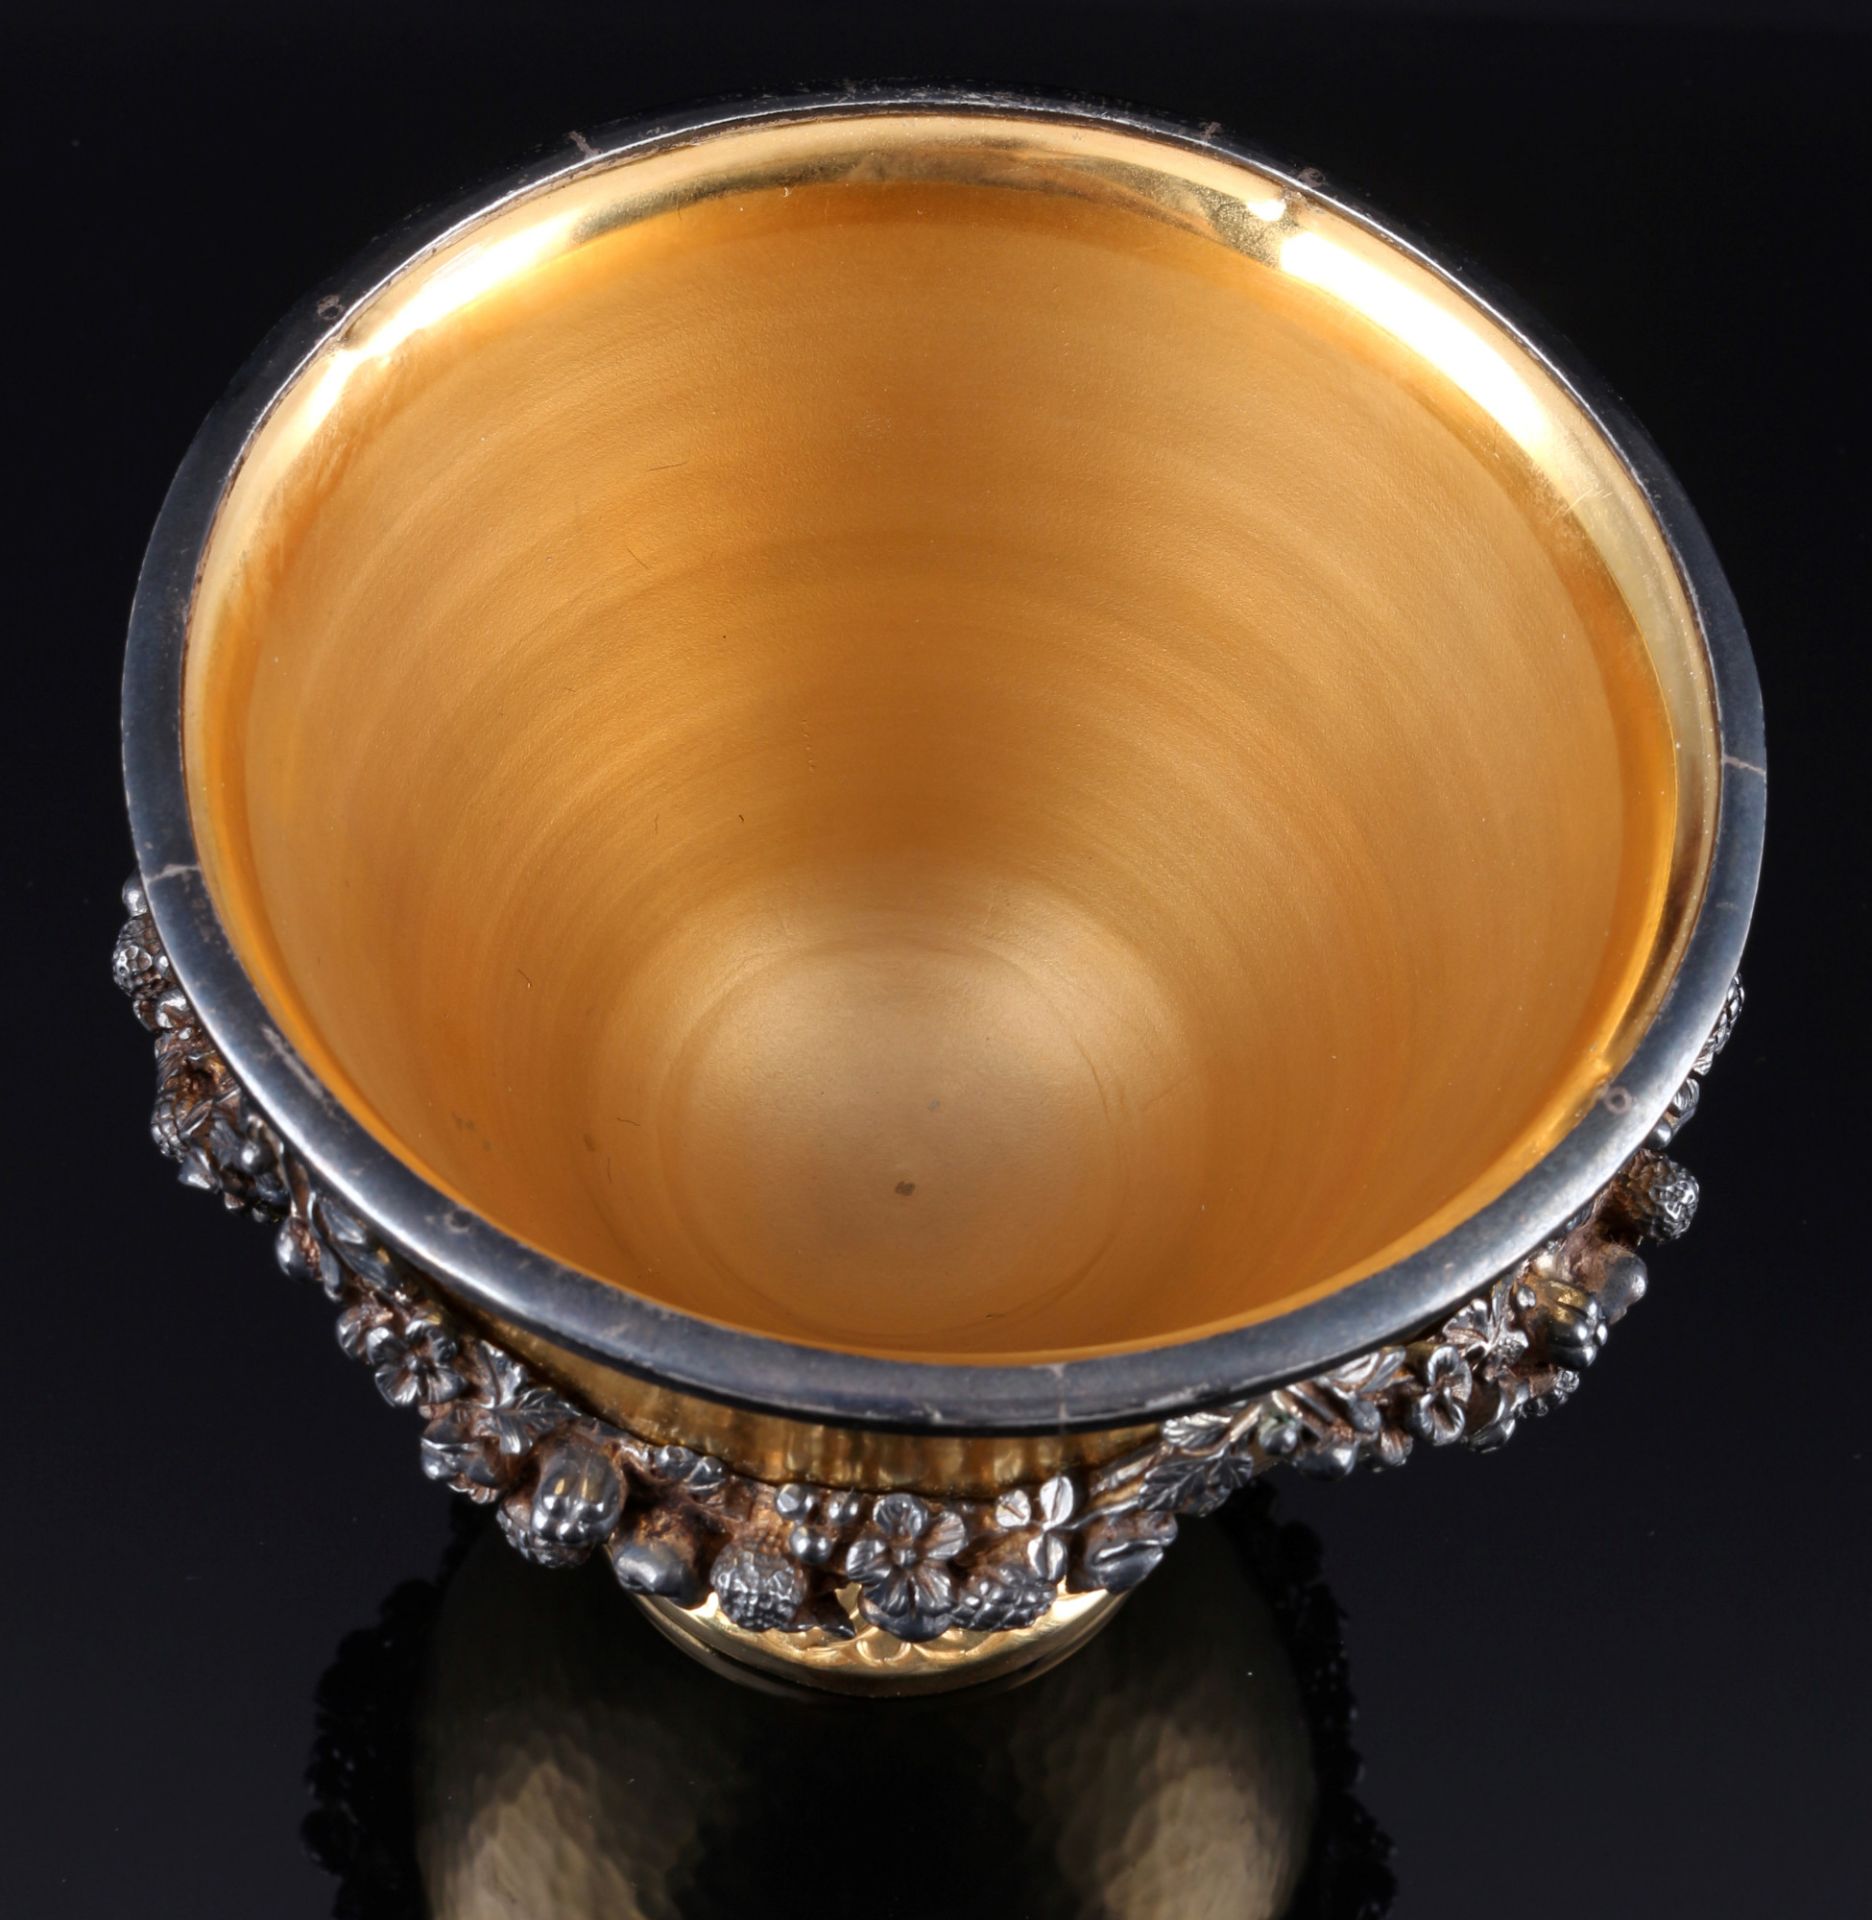 Ilias Lalaounis bronze goblet with 925 silver rim, Ilias Lalaounis Bronze Kelch mit 925 Silberrand, - Image 2 of 5